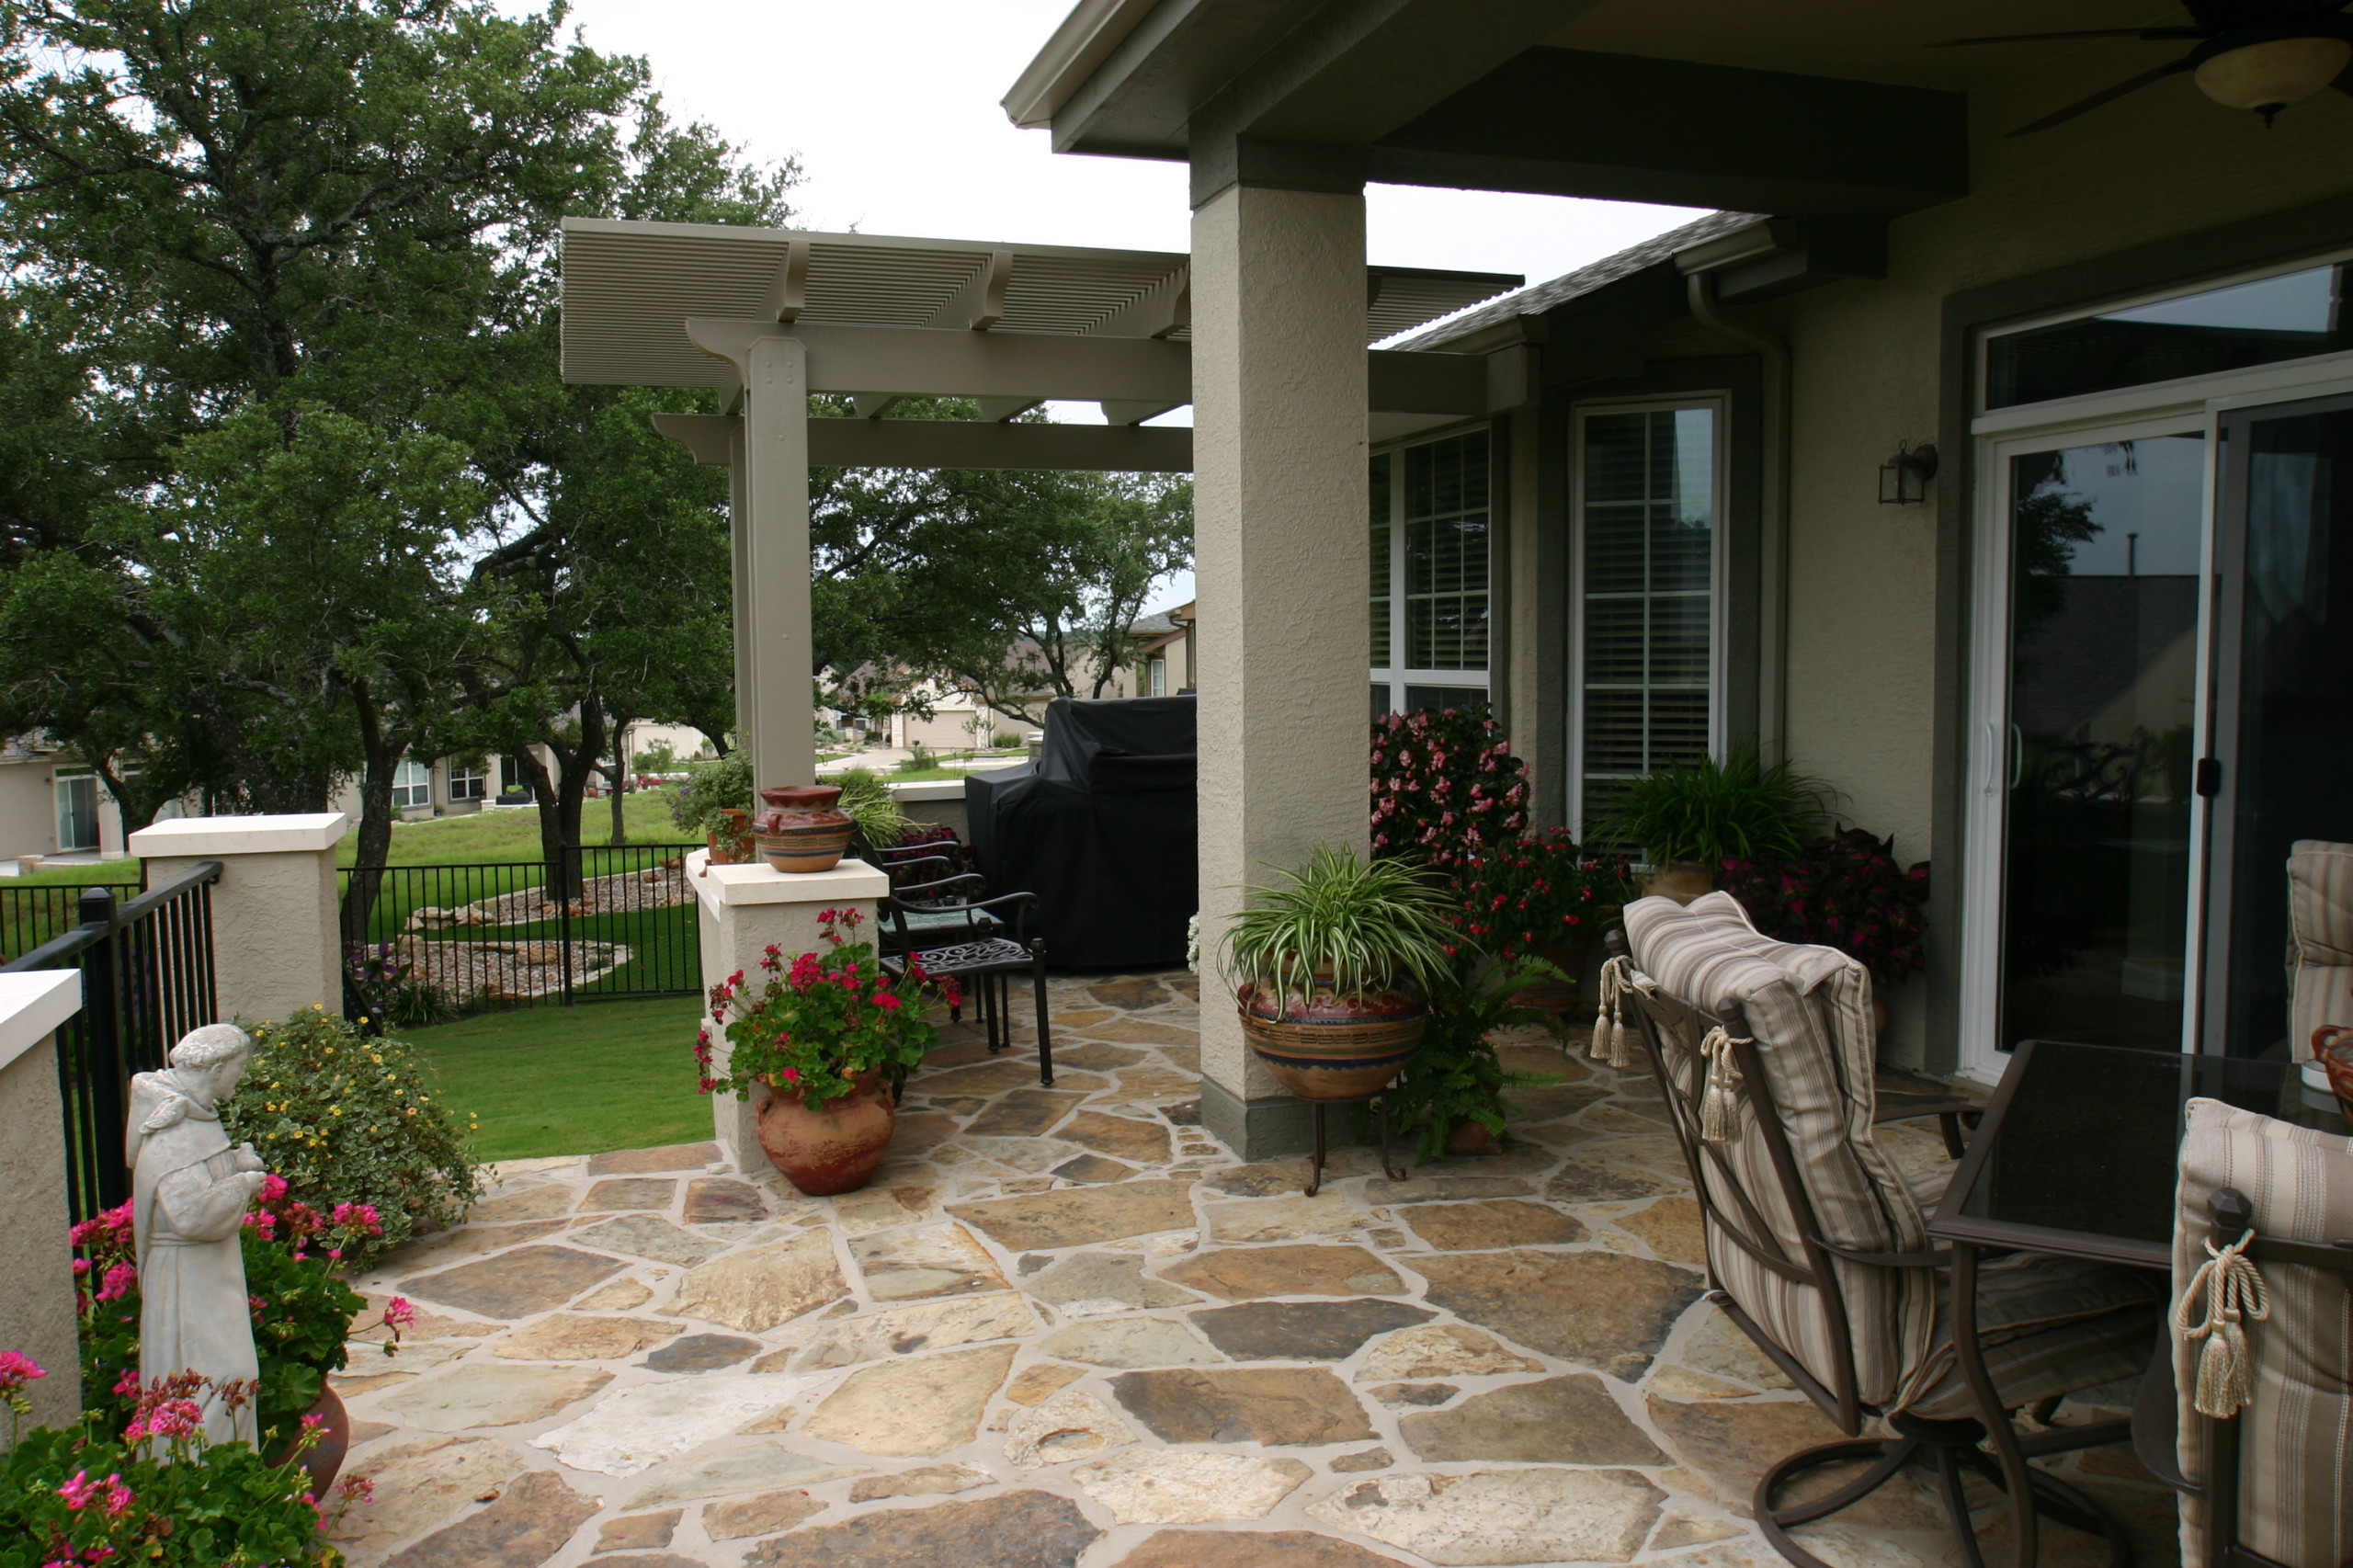 Chocolate / brown flagstone extension w/ stucco seatwalls and columns, Alumawood